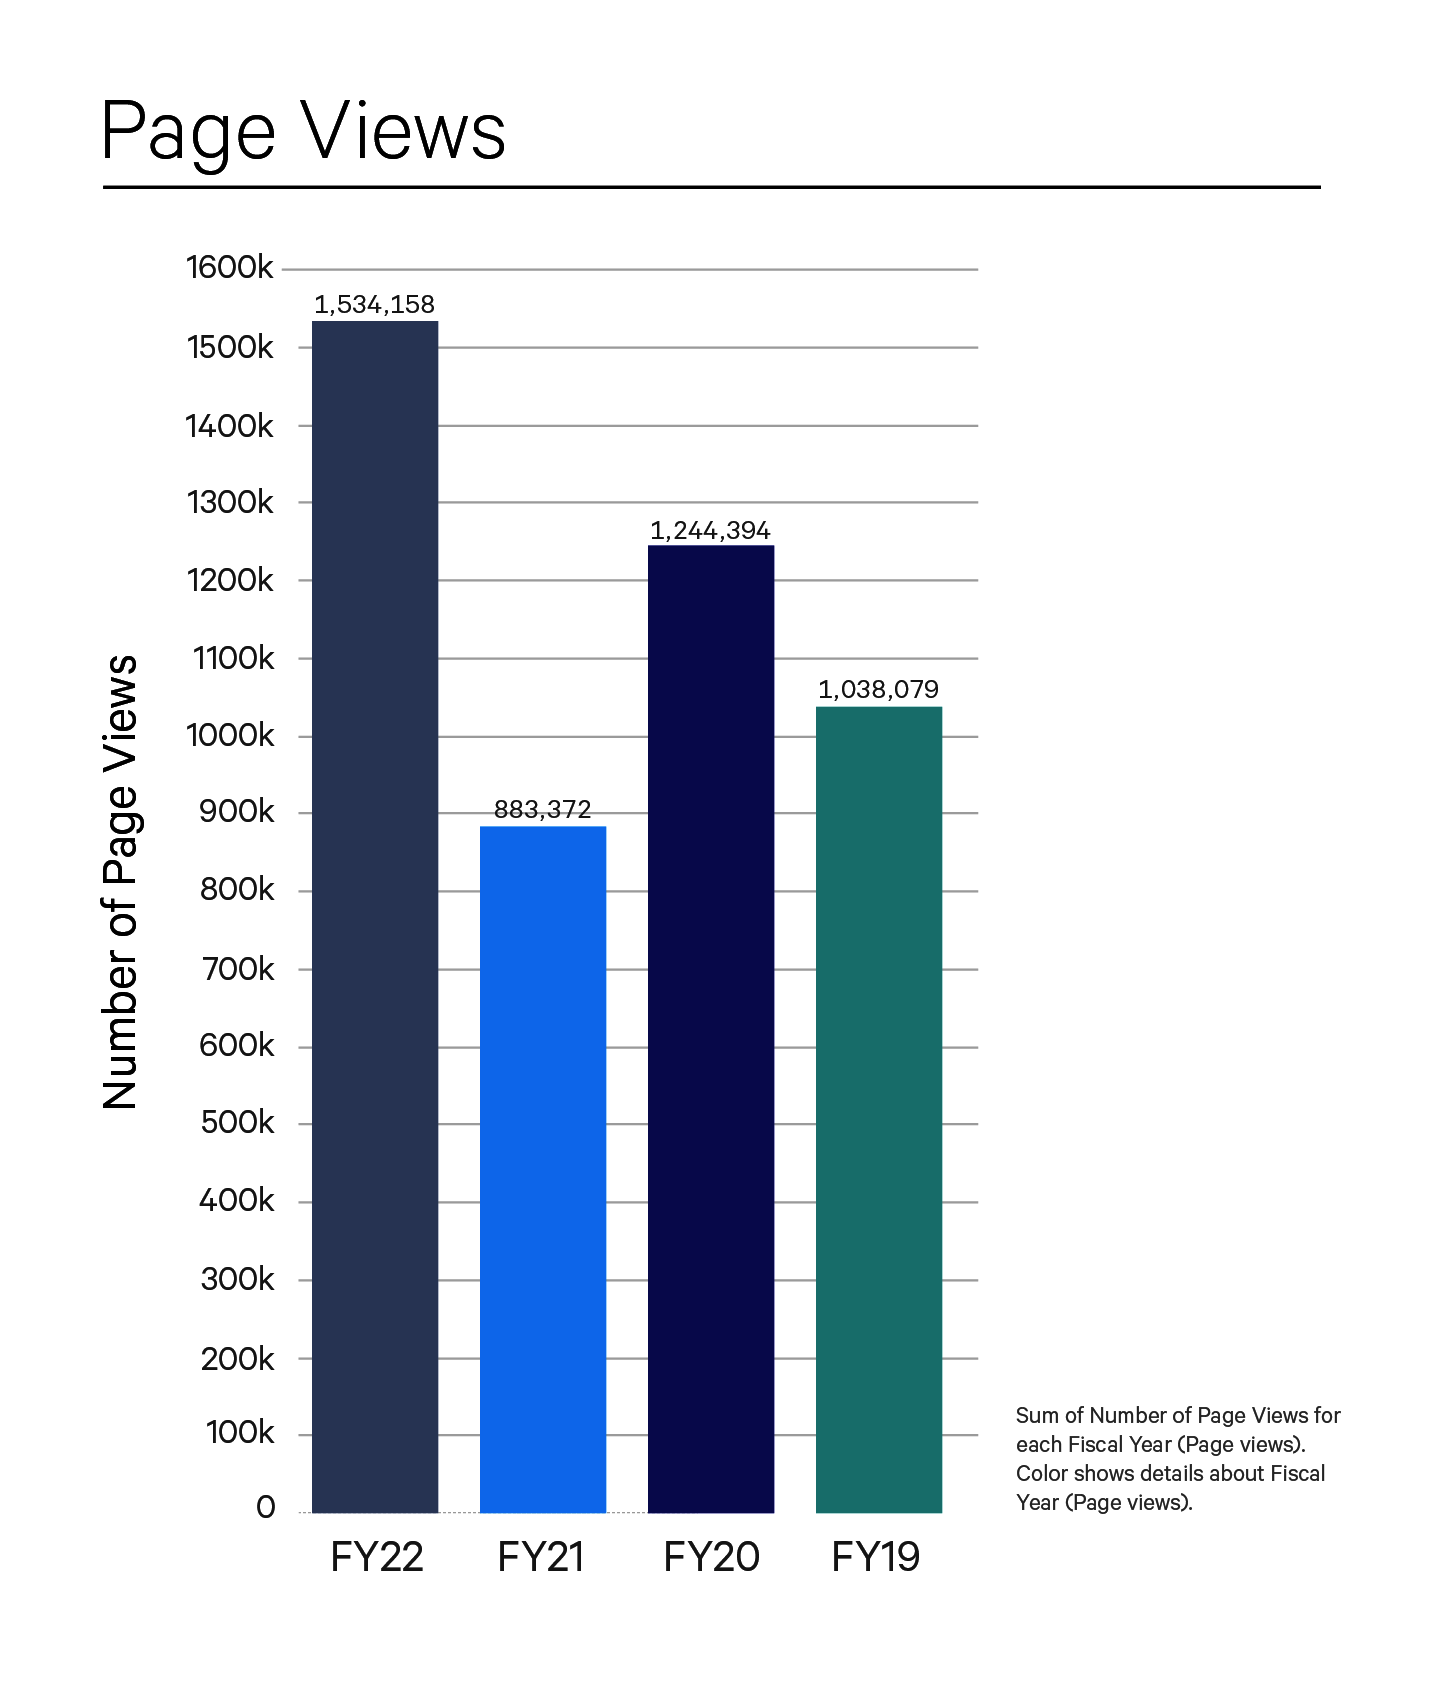 Bar chart titled “page views” with the Y-axis labeled “Number of Page Views” and the X-axis labeled “FY22, FY21, FY20, and FY19”, showing that FY22 has 1534158 page views, FY21 has 883372, FY20 has 1244394, and FY19 has 1038079. Text on the side reads “Sum of number of page views for each fiscal year (Page views). Color shows detail about fiscal year (Page views). 